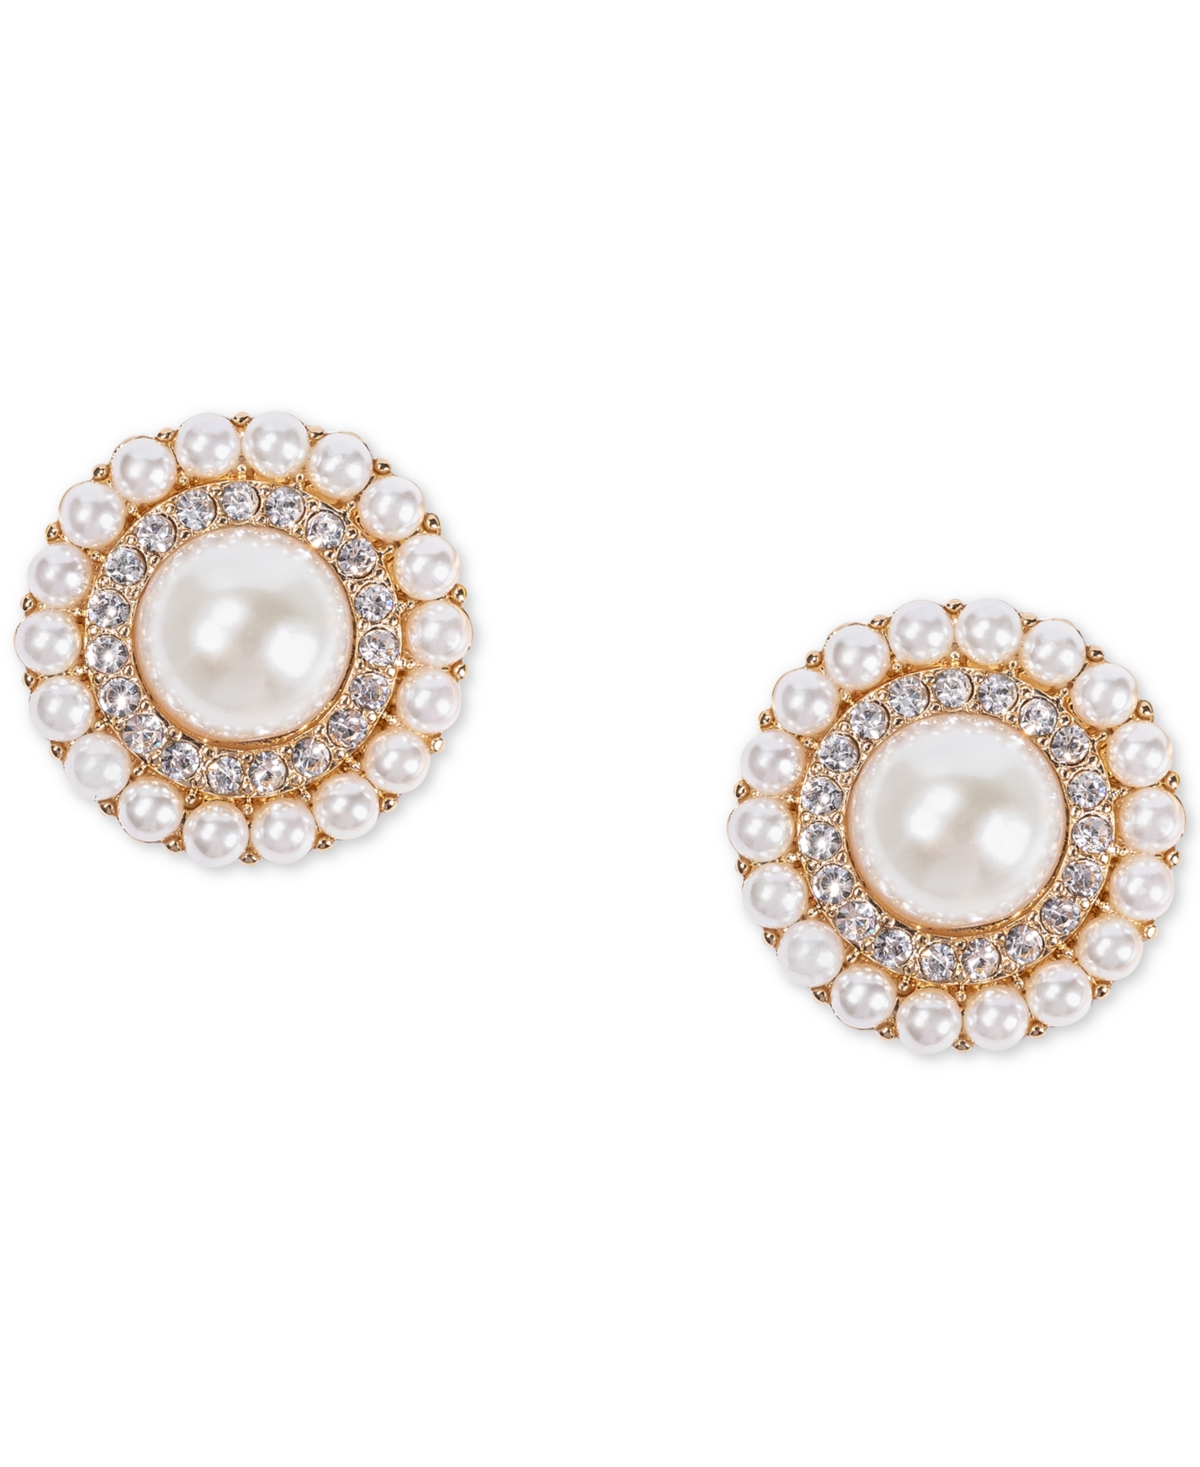 Gold-Tone Pave & Imitation Pearl Orbital Button Earrings, Created for Macy's - White